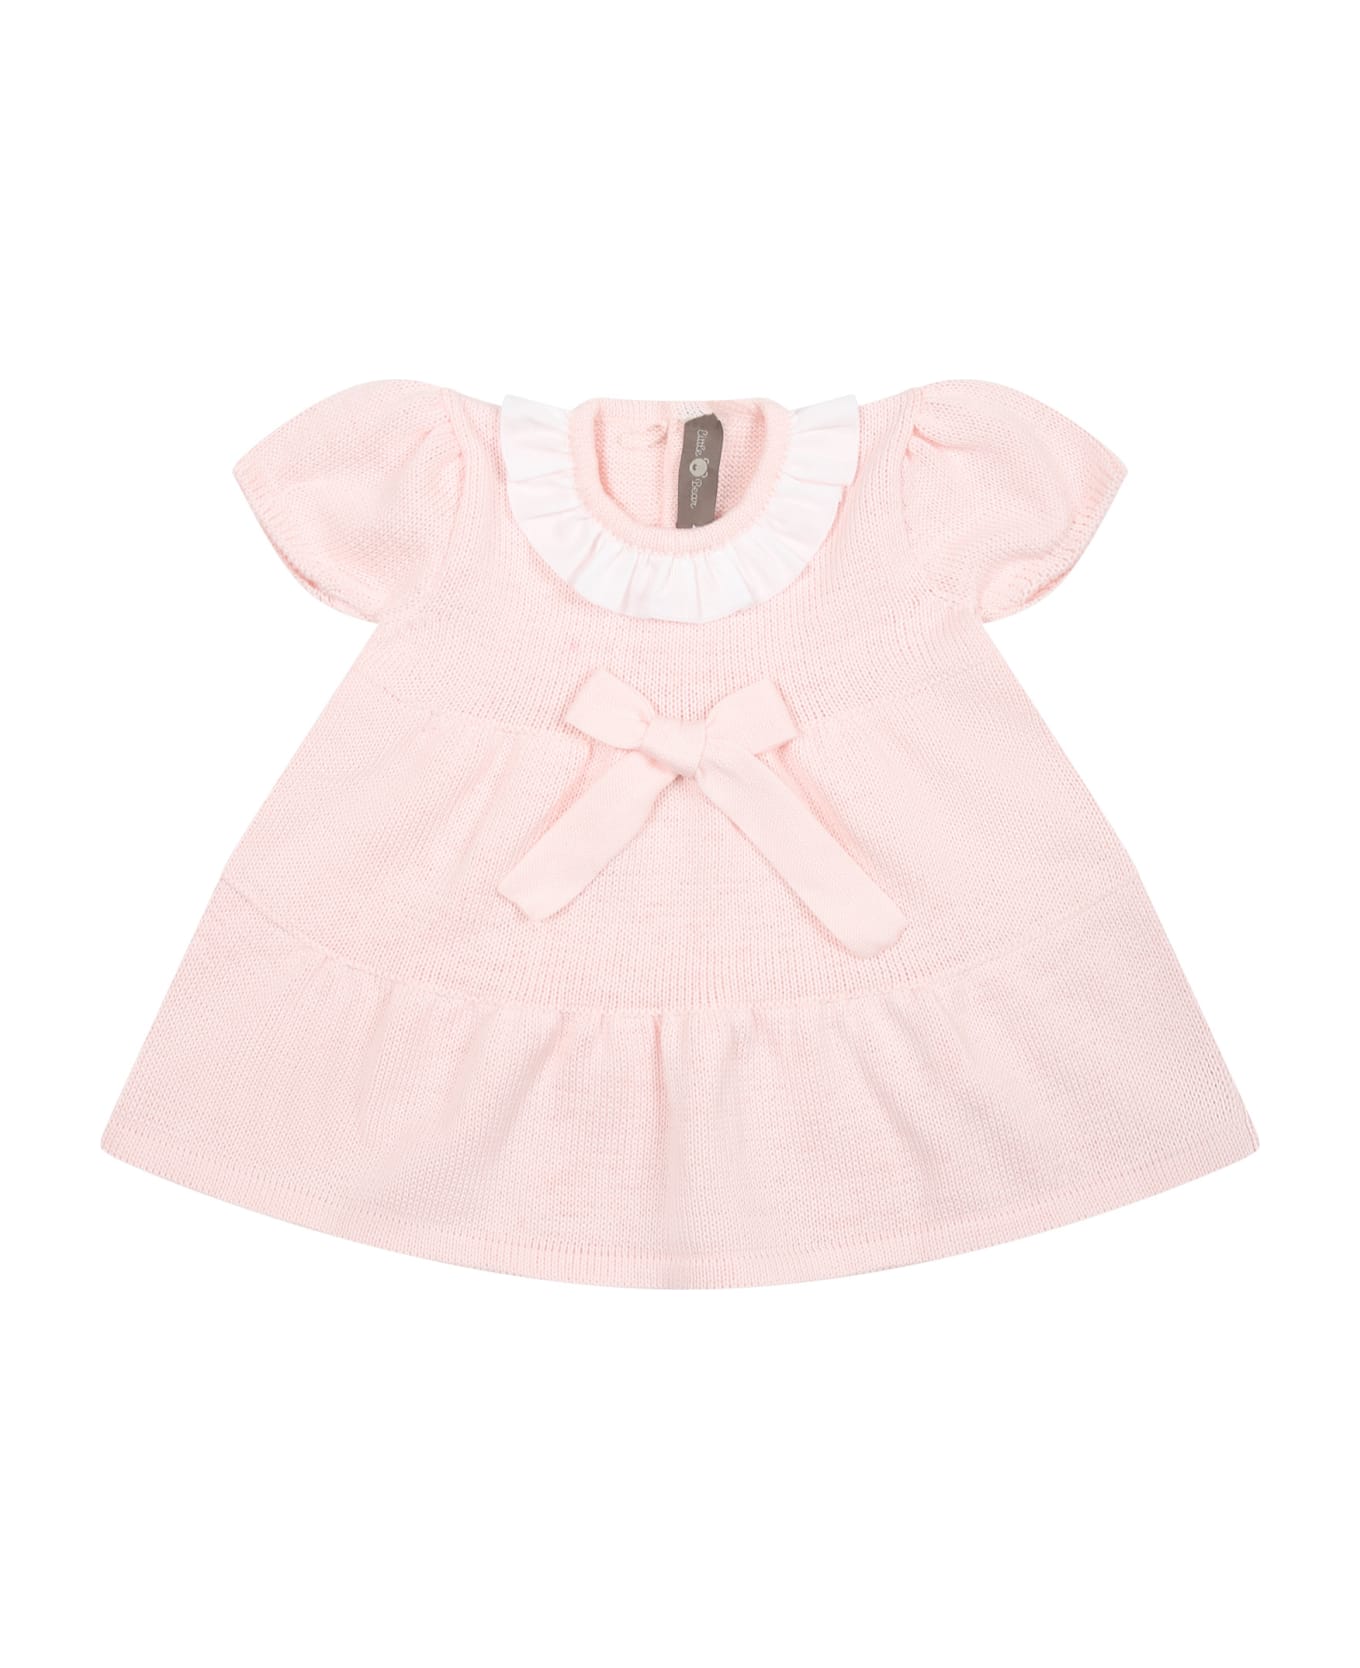 Little Bear Pink Casual Dress For Baby Girl - Pink ウェア